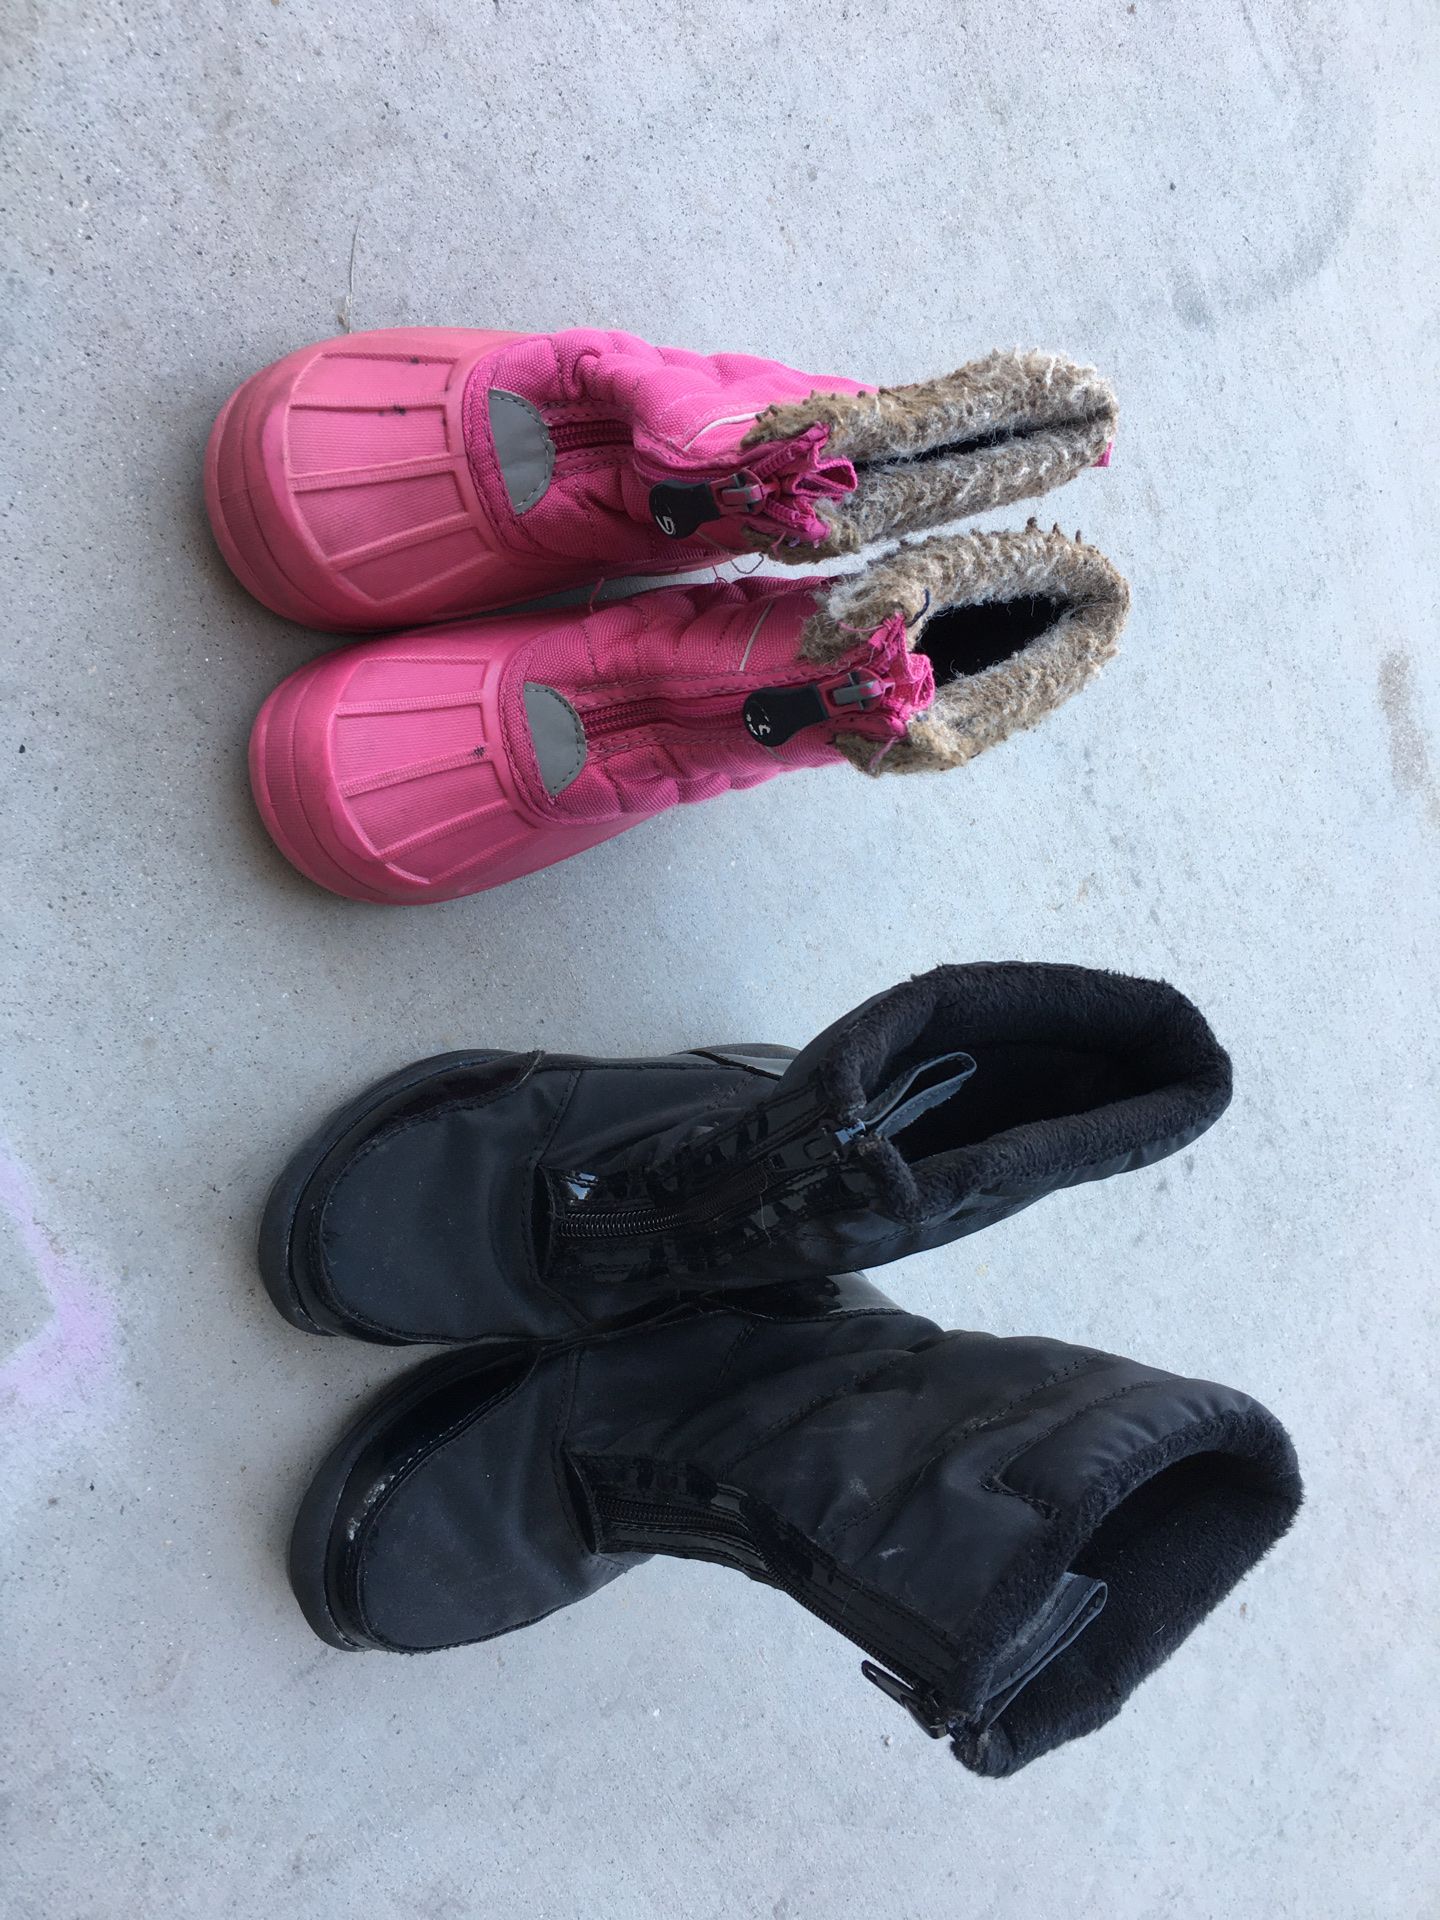 Kids snow boots $5 each or $8 both, cash only